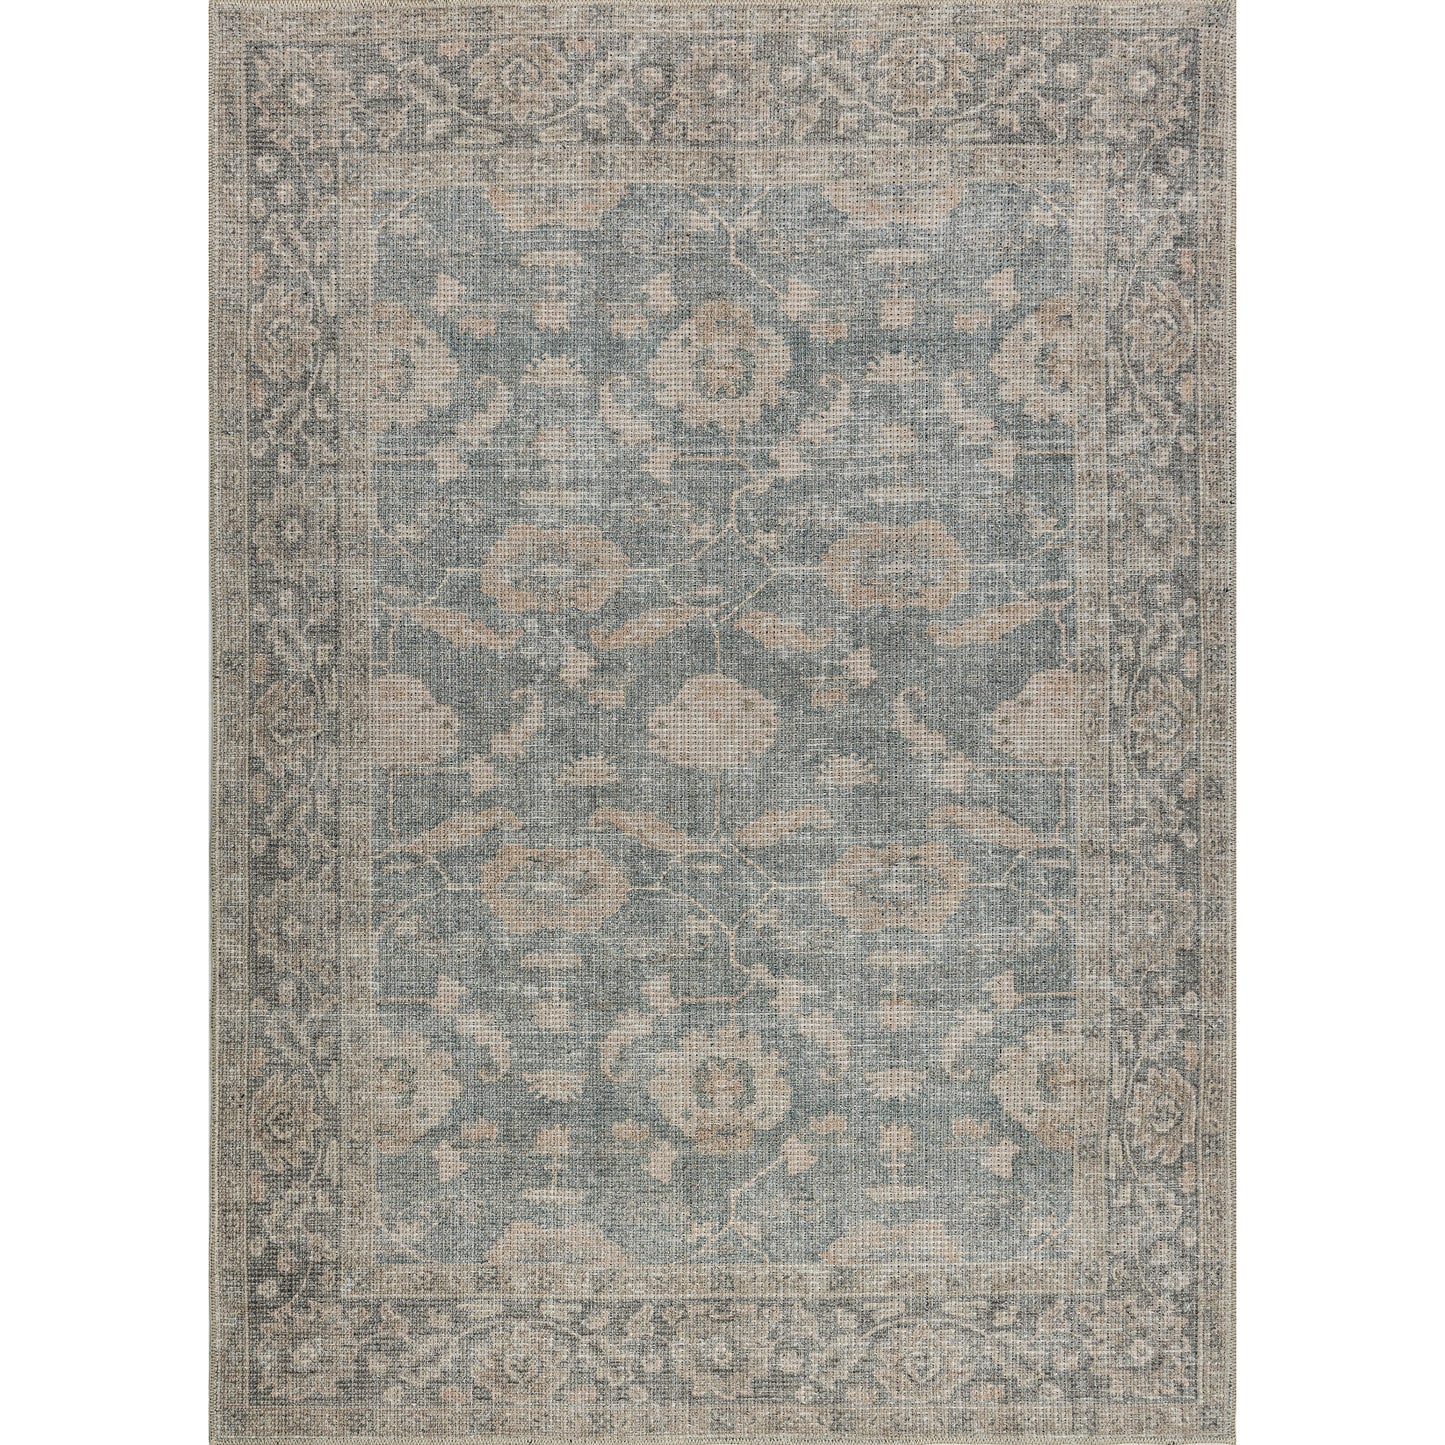 beige ivory cotton and polyster machine washable traditional rustic area rug 2x8, 3x10, 2x10 ft Long Runner Rug, Hallway, Balcony, Entry Way, Kitchen, Stairs